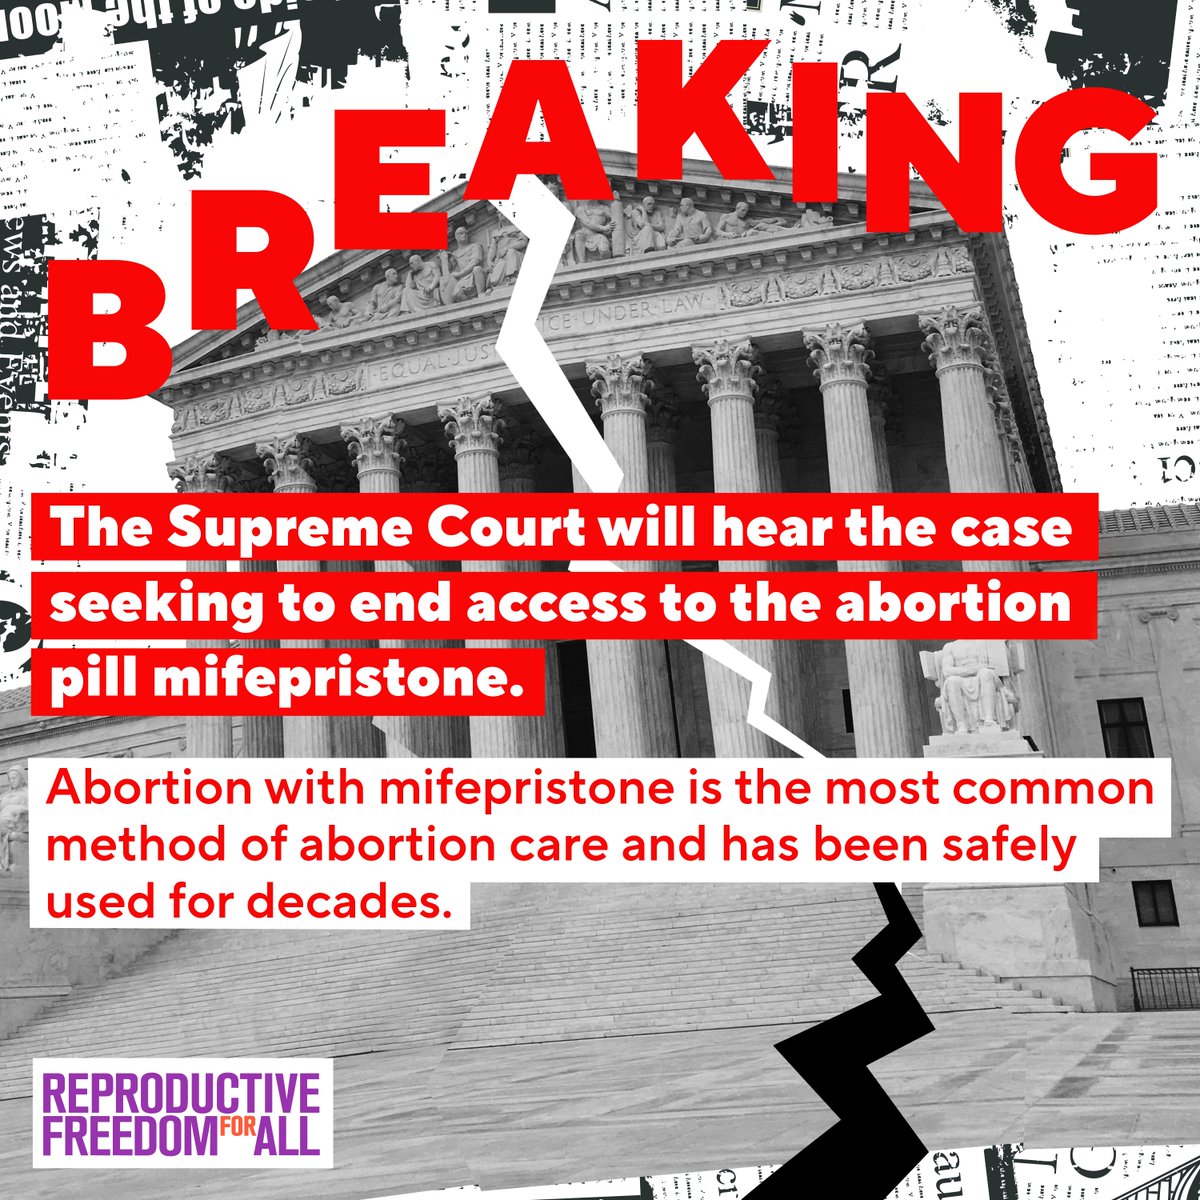 The Supreme Court will once again hear a case on abortion access. Anti-abortion extremists are hoping they block access to mifepristone as part of their crusade to ban abortion nationwide.

#SCOTUS must do what’s right and protect #MedicationAbortion access.